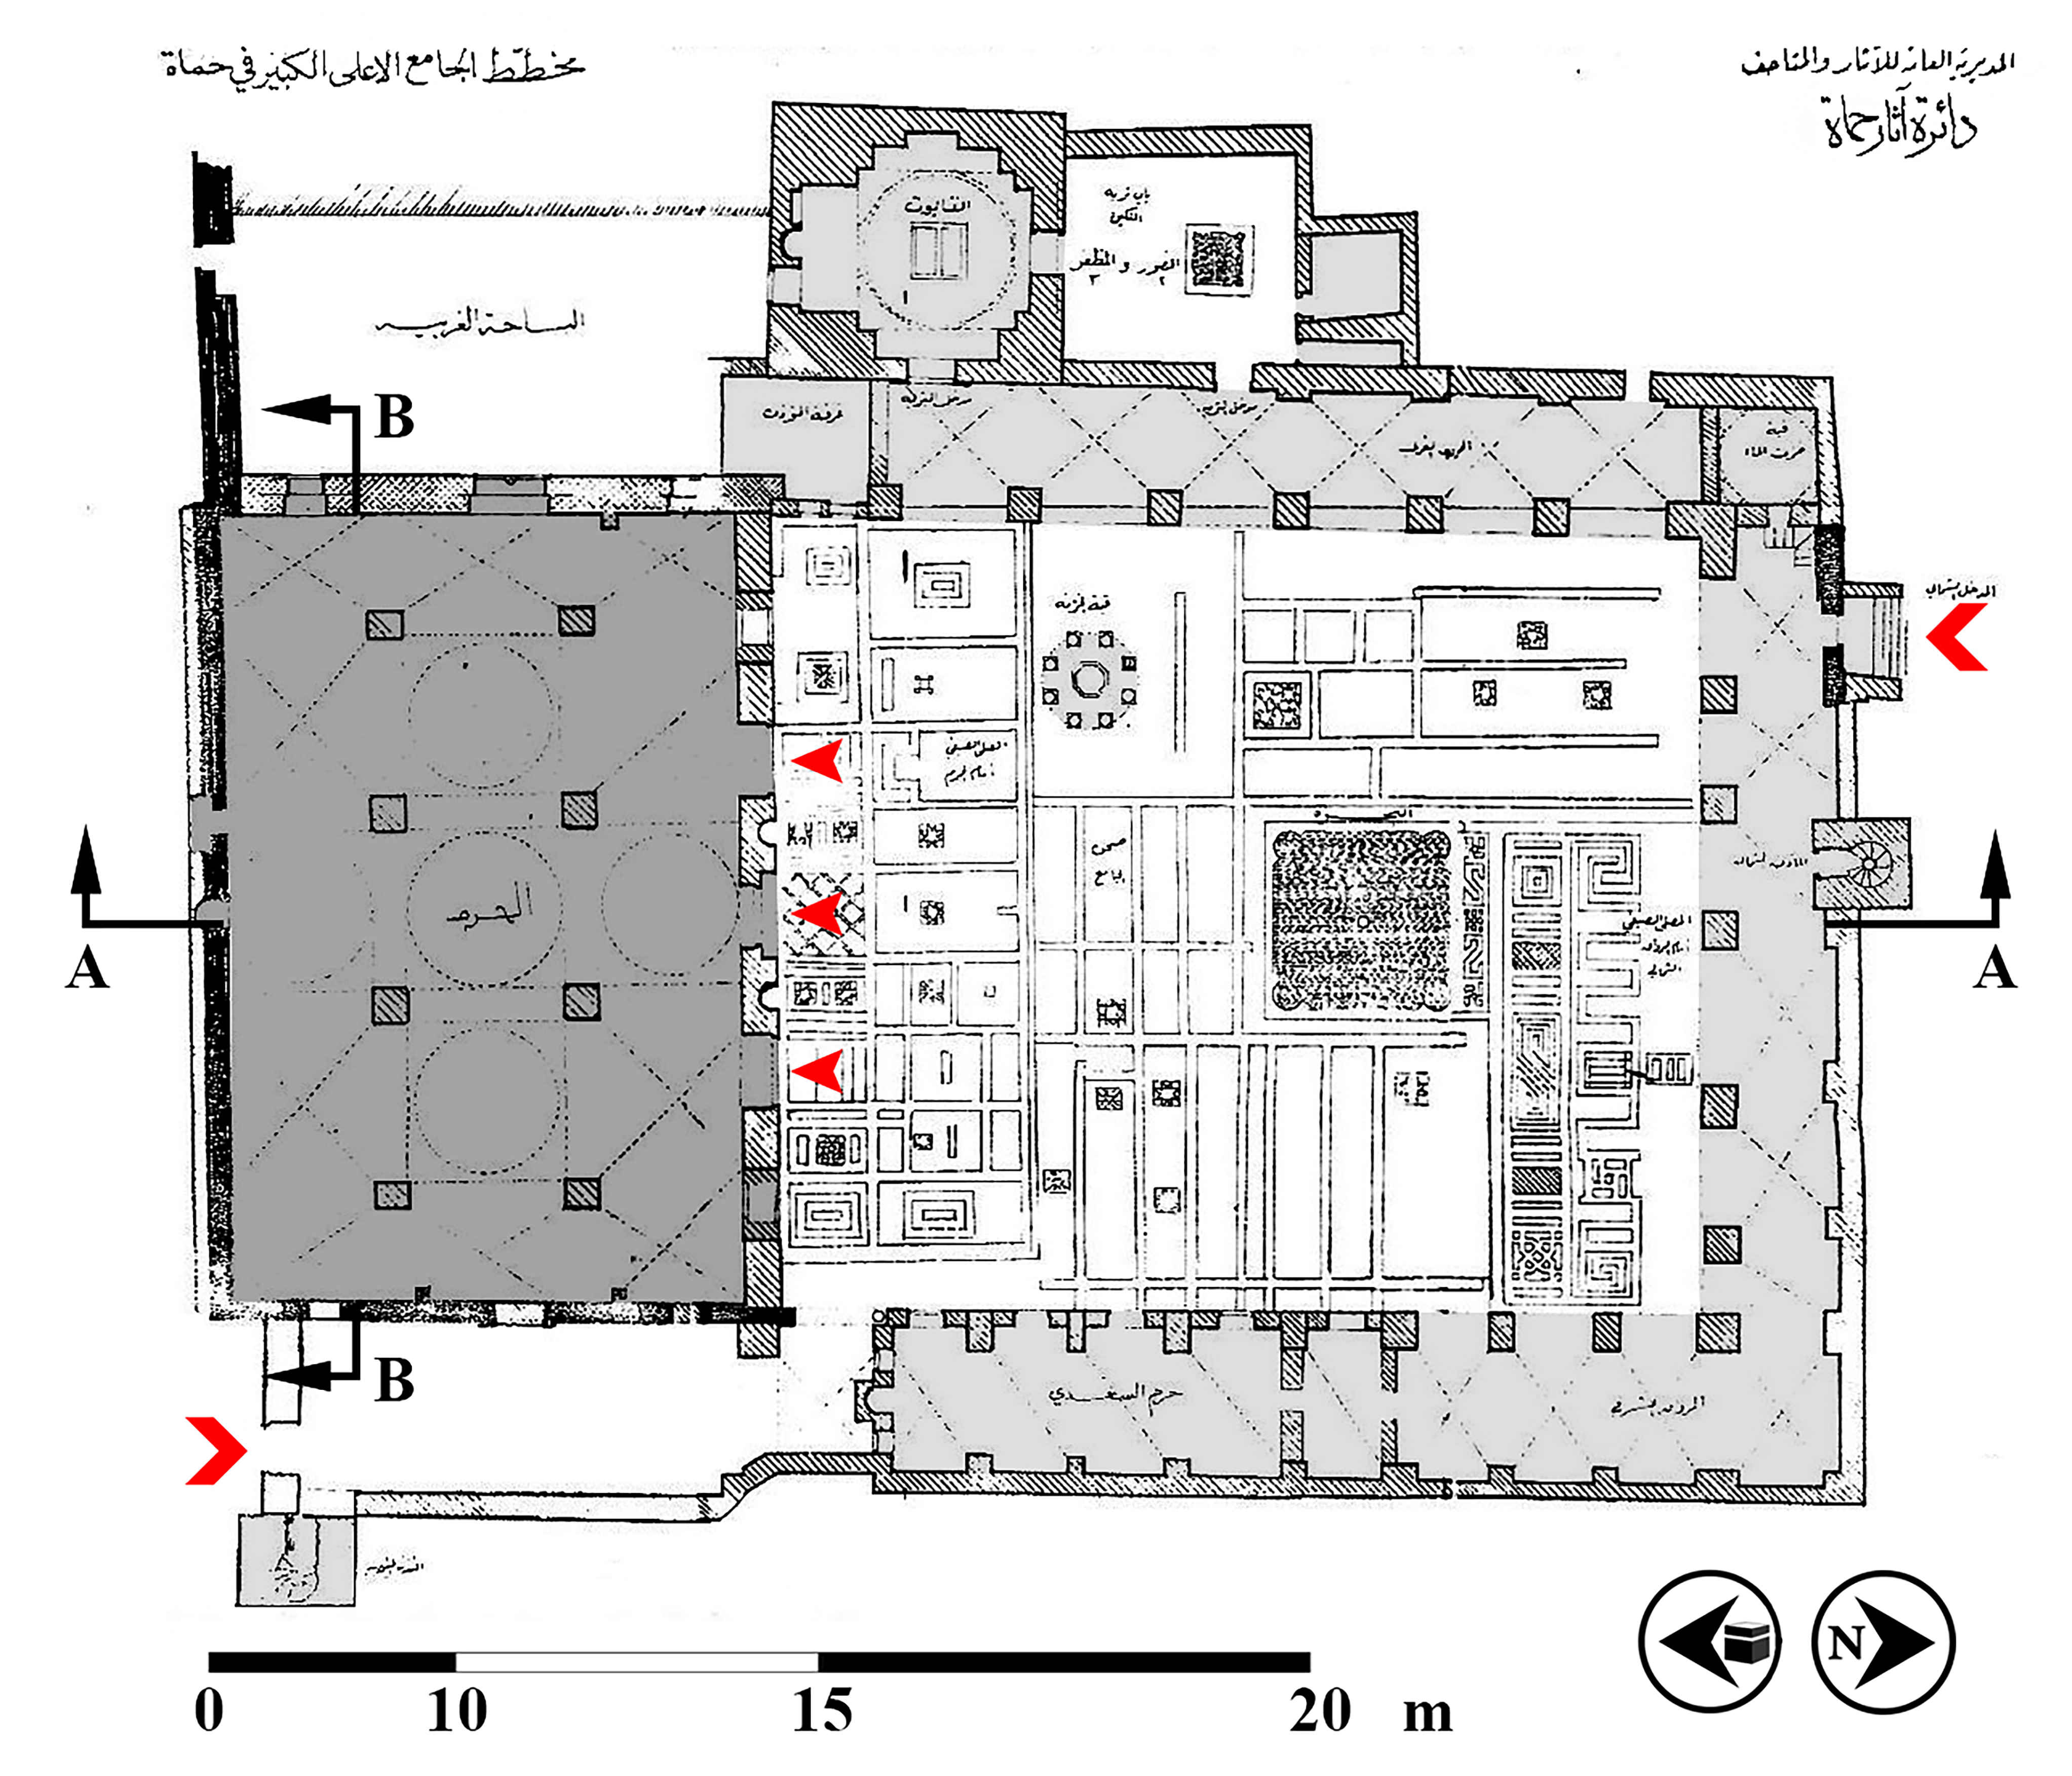 Layout of the Upper Mosque in Hama [25].